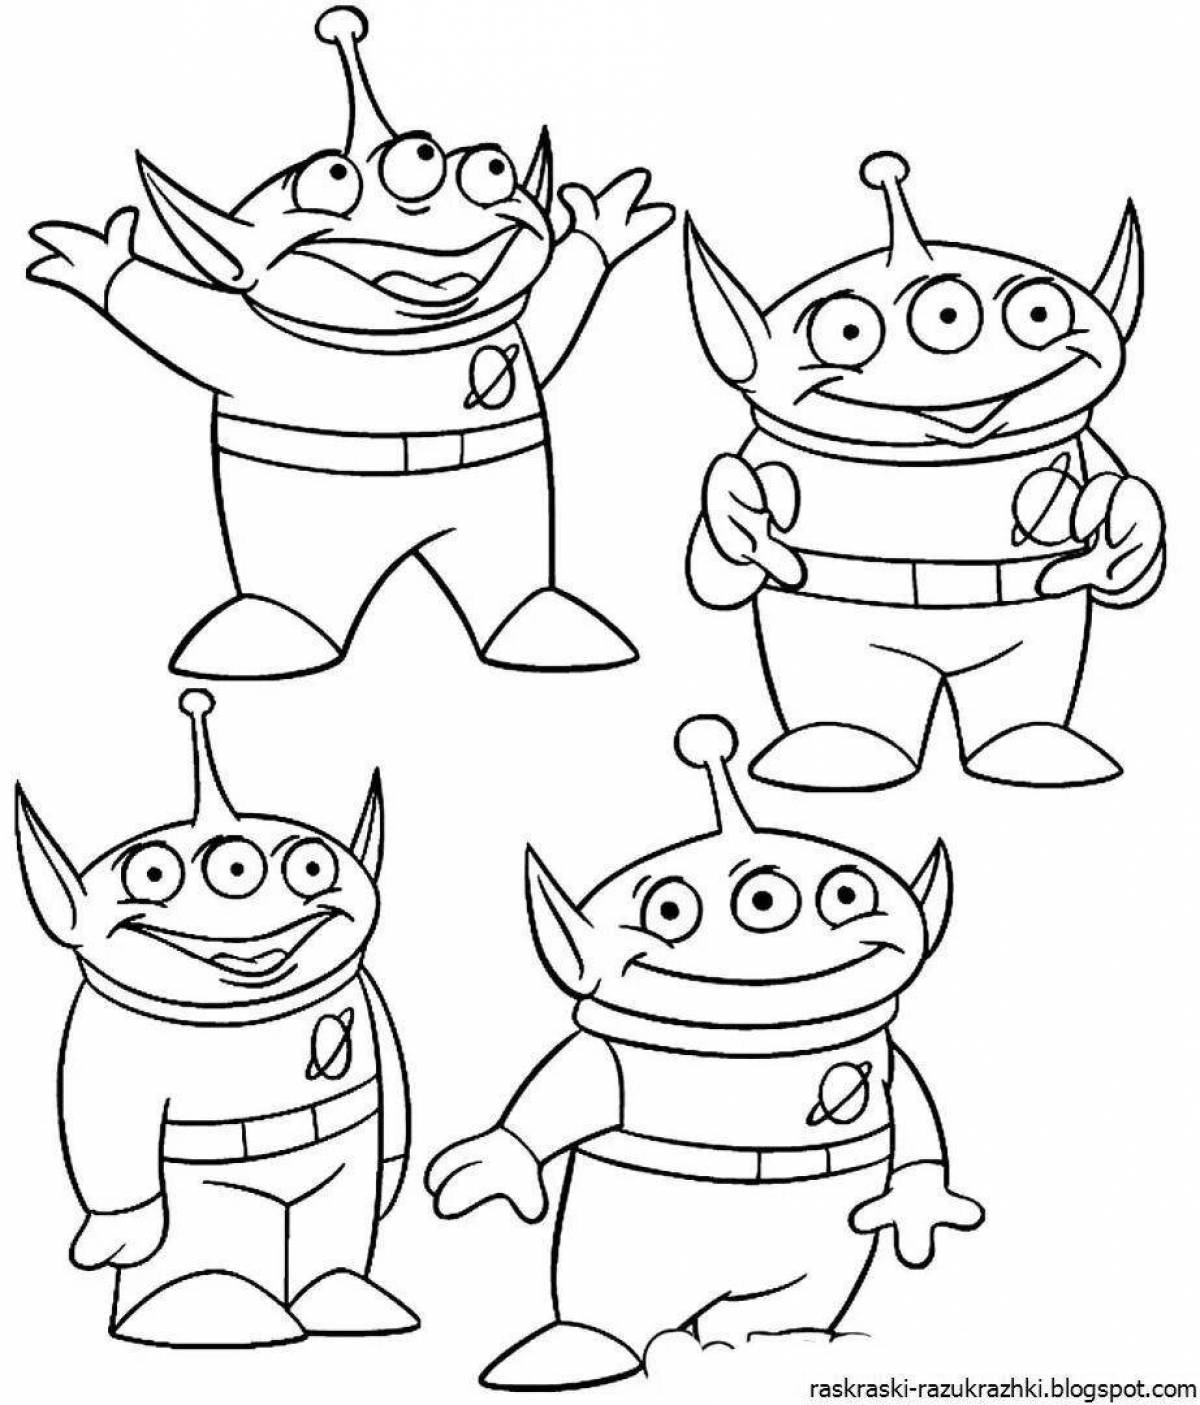 Funny alien coloring pages for kids